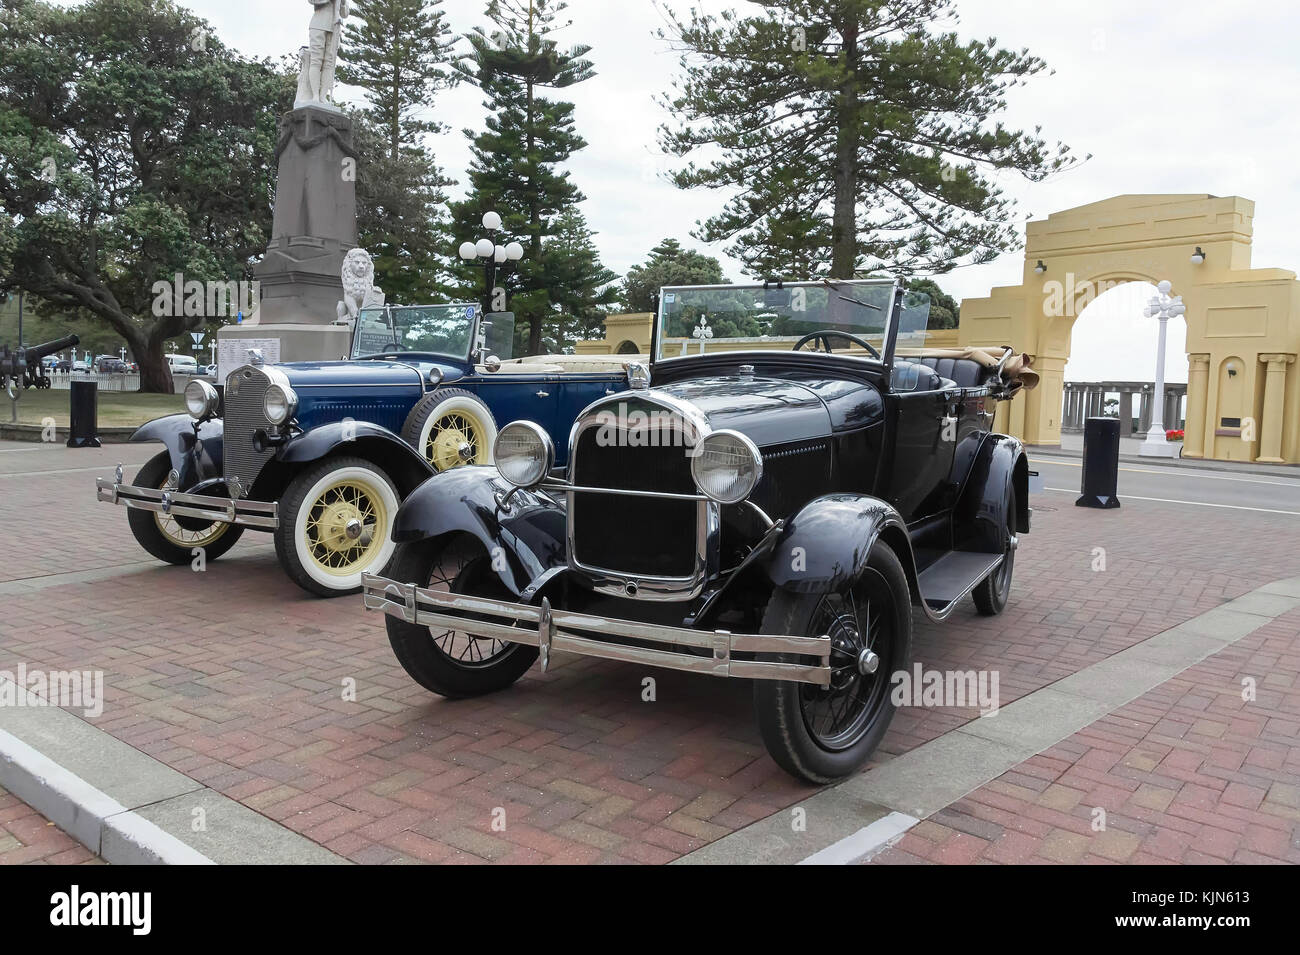 The Vintage Cars in Napier - Retro on Wheels. Stock Photo